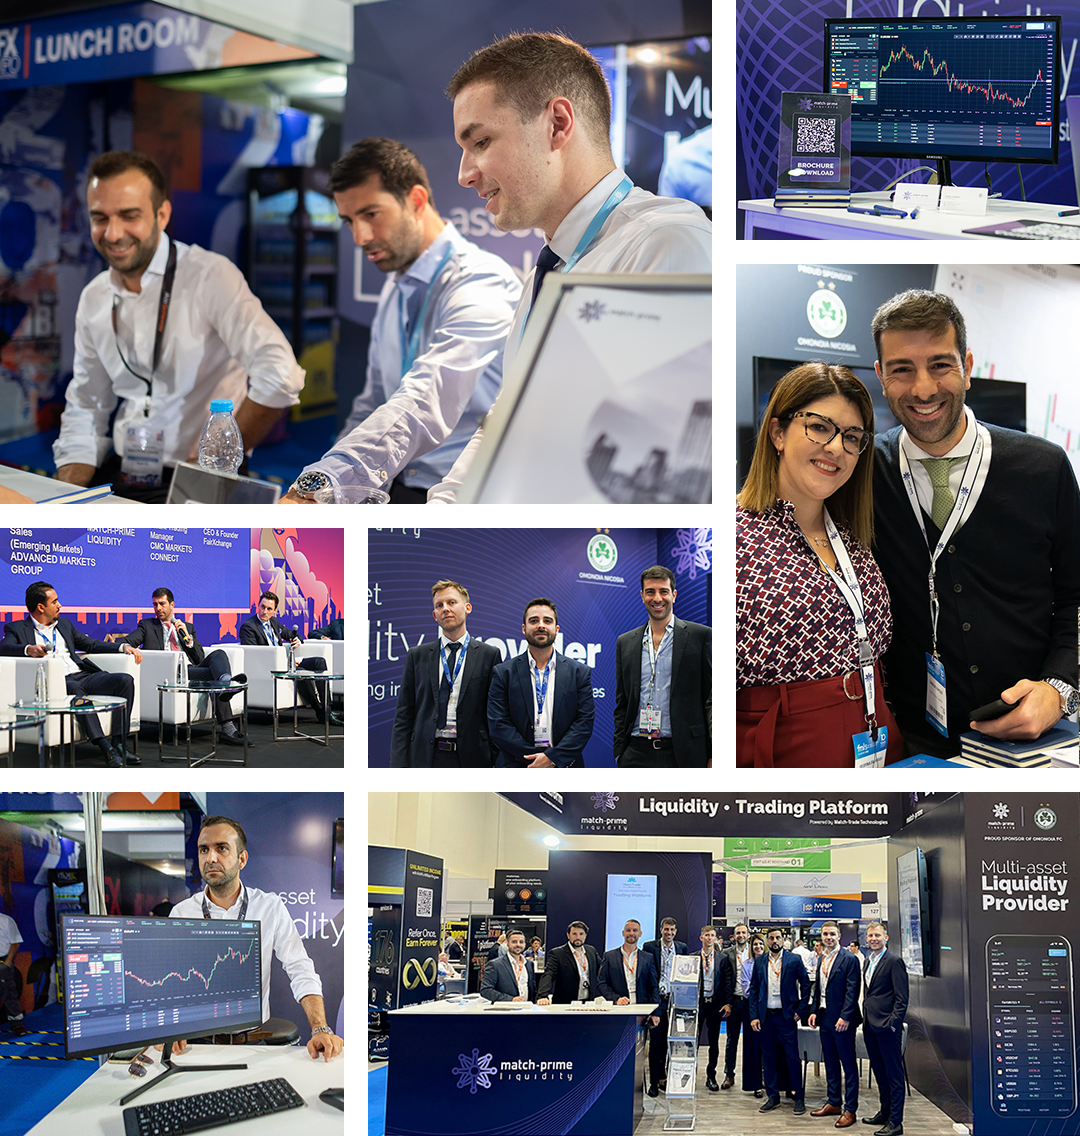 A collage of 7 photos showing the employees of the Match-Prime liquidity provider 